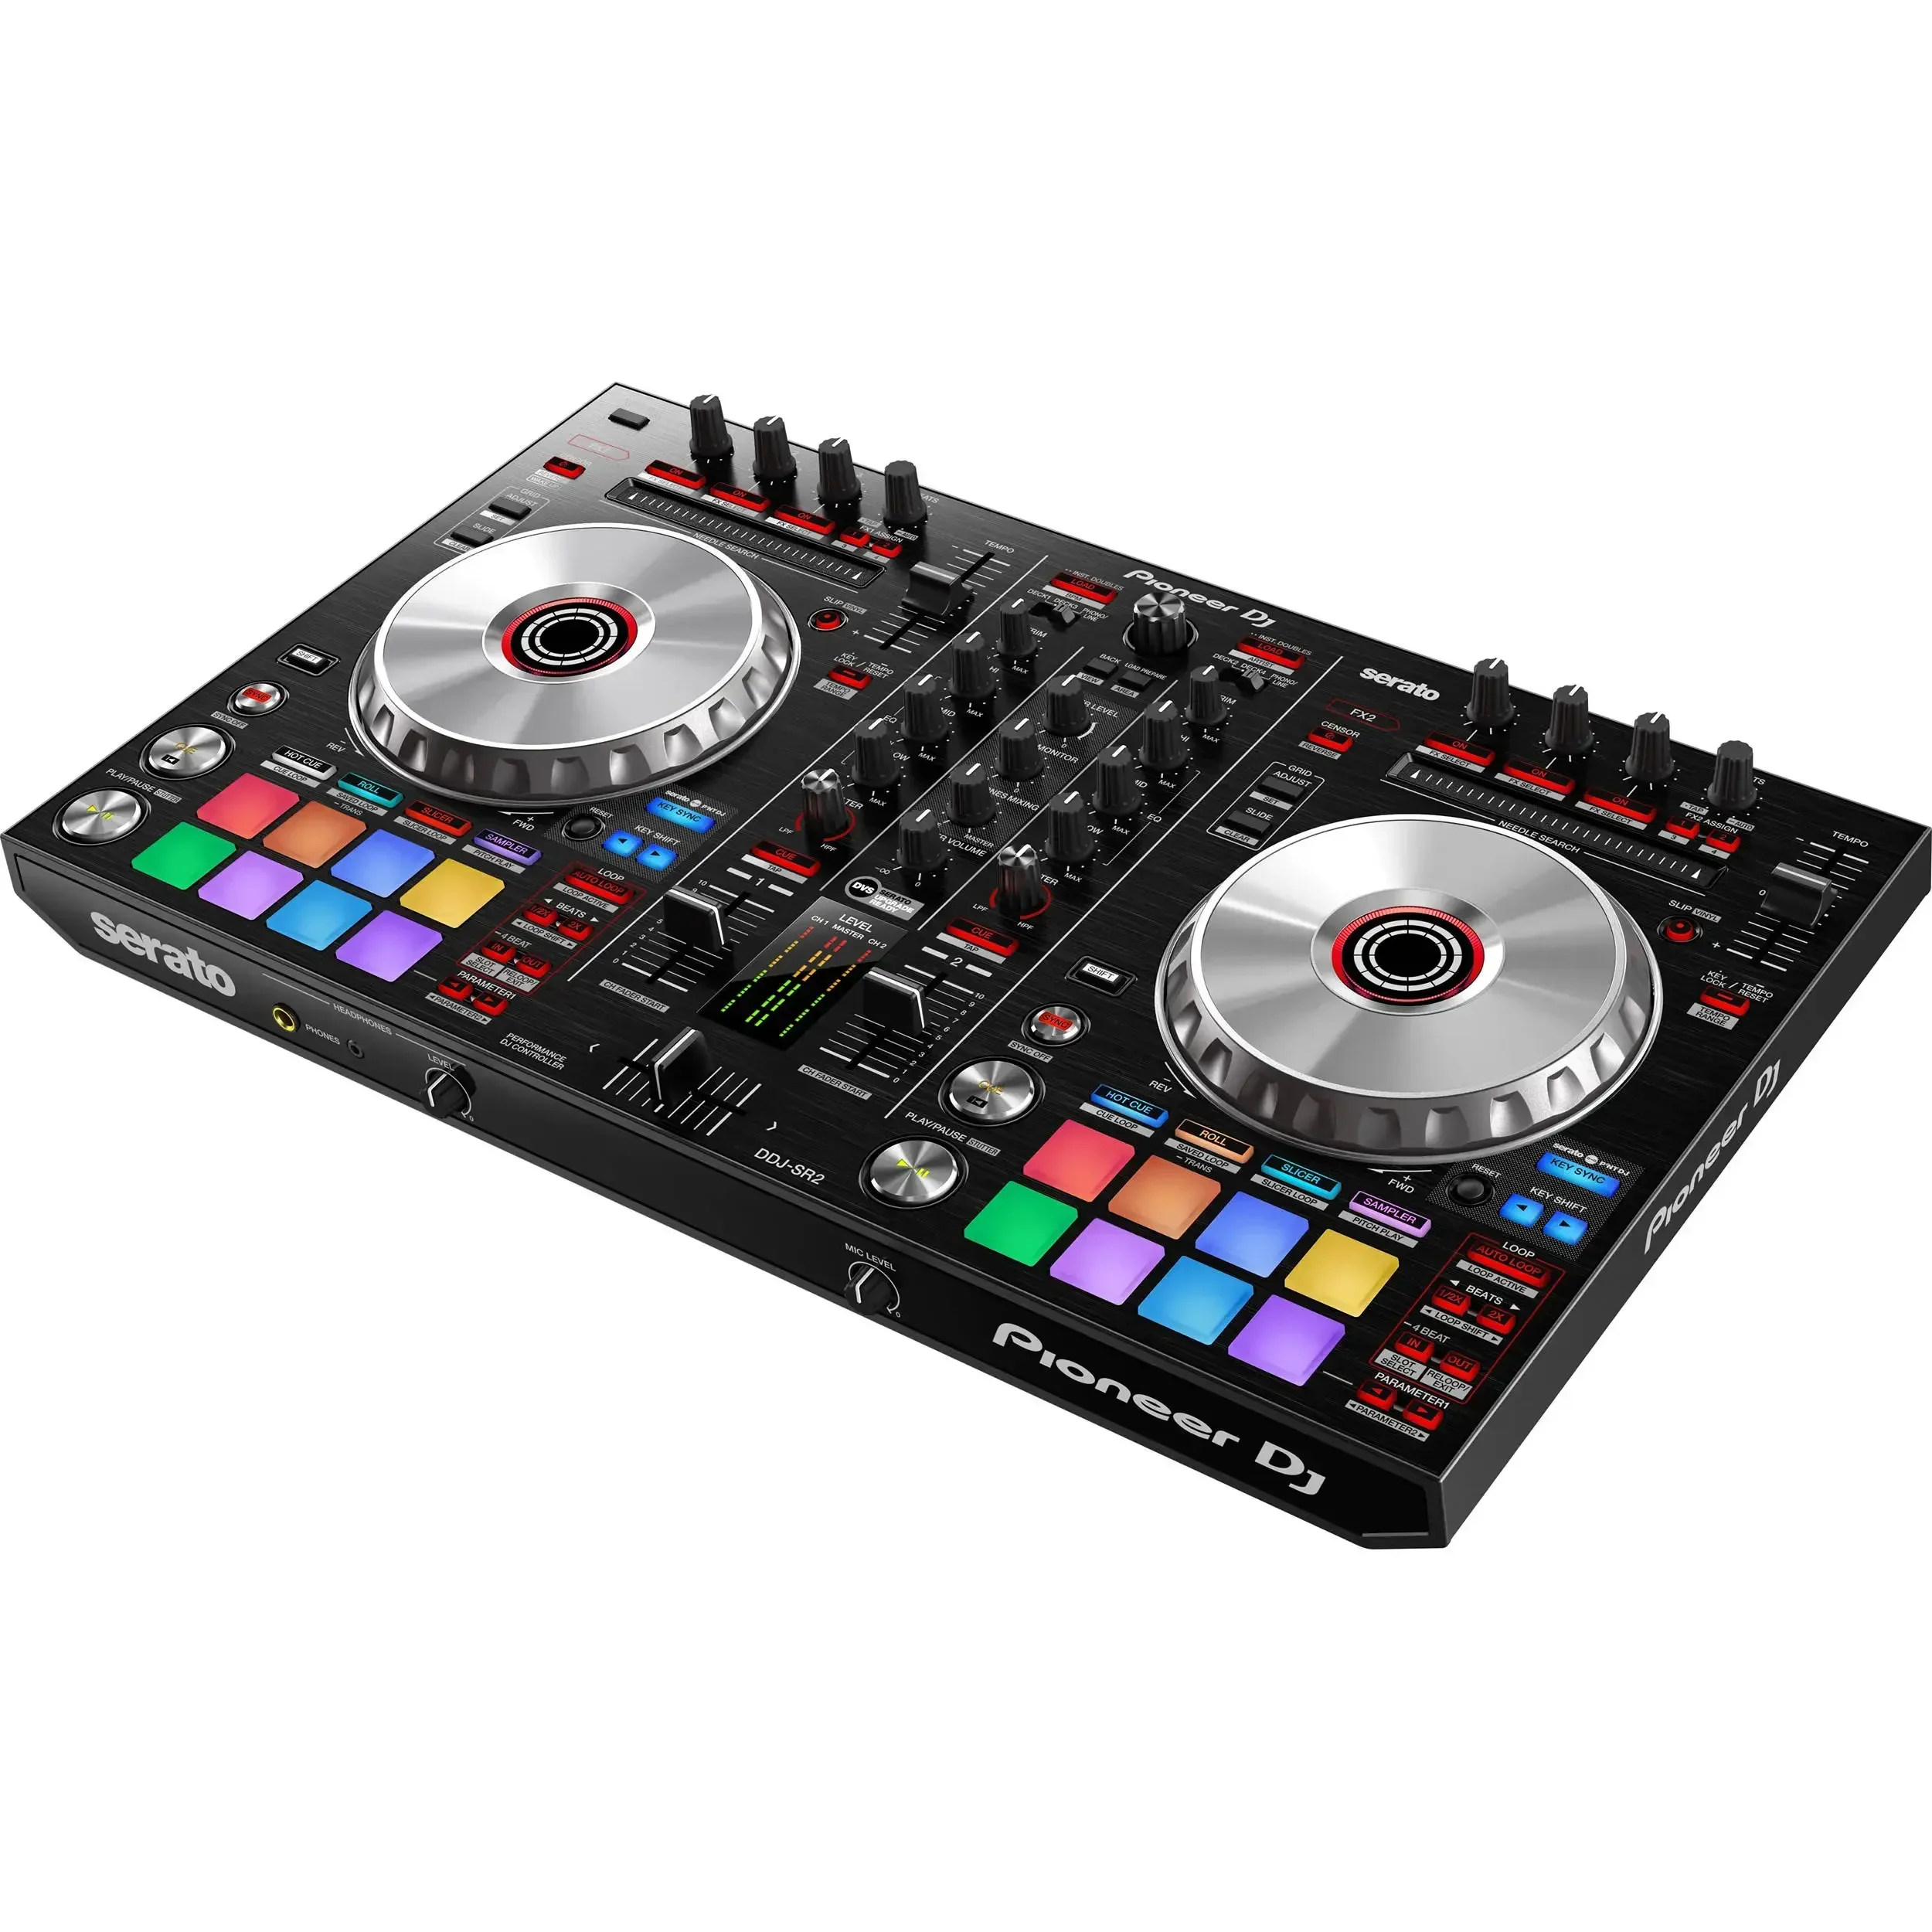 

SUMMER SALES DISCOUNT ON 100% DISCOUNTED Pioneer DJ DDJ-SR2 Portable 2-Channel Controller for Serato DJ Mixer